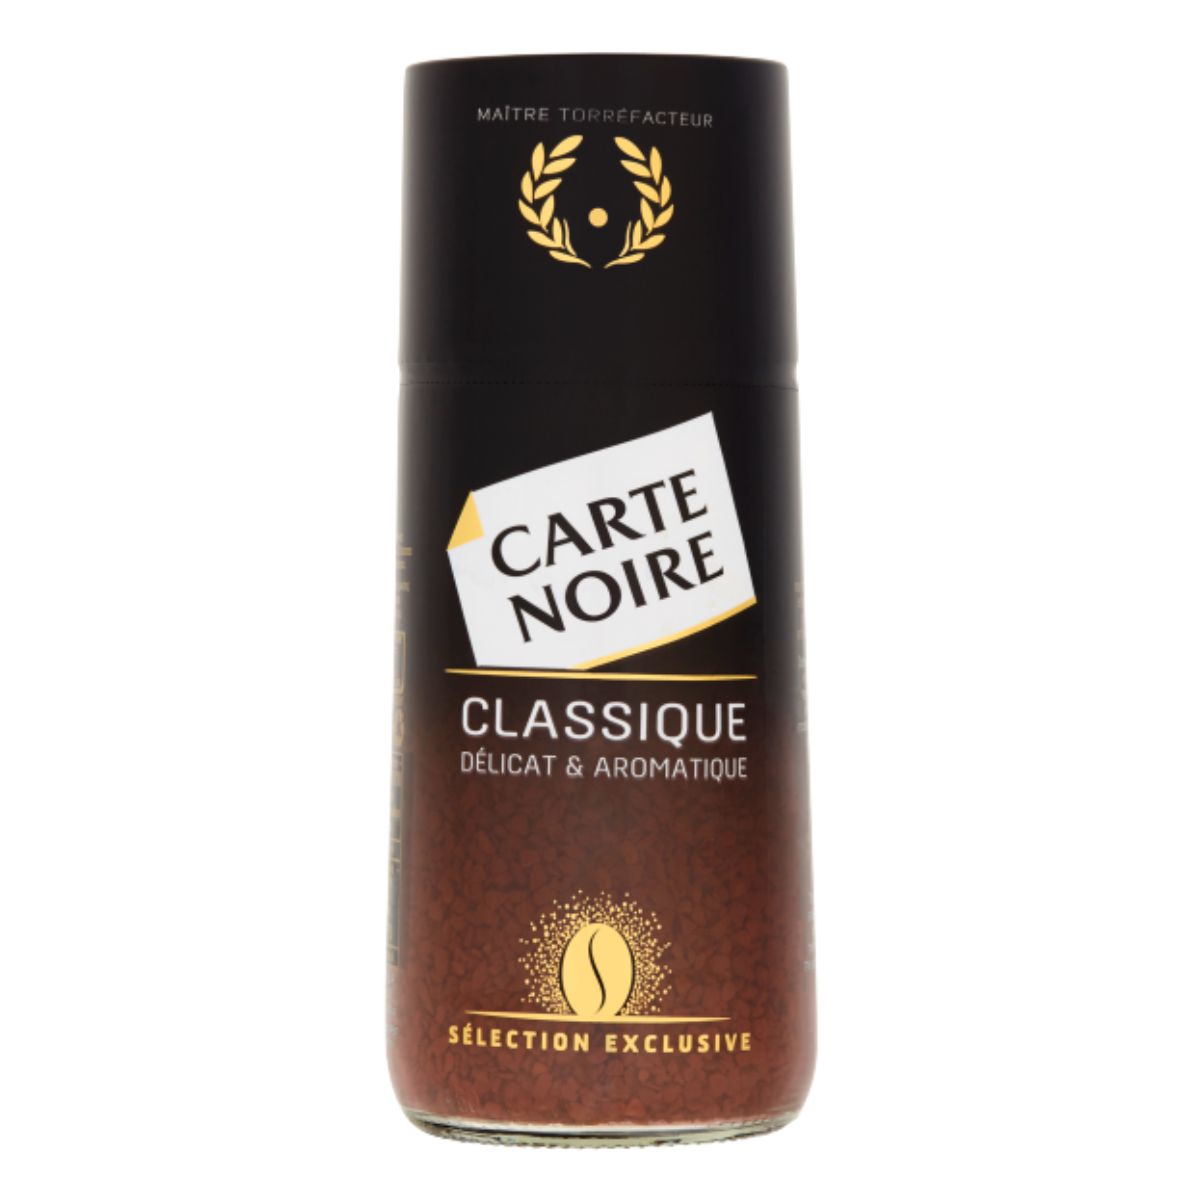 A bottle of Carte Noire - Classique Instant Coffee - 100g on a white background.